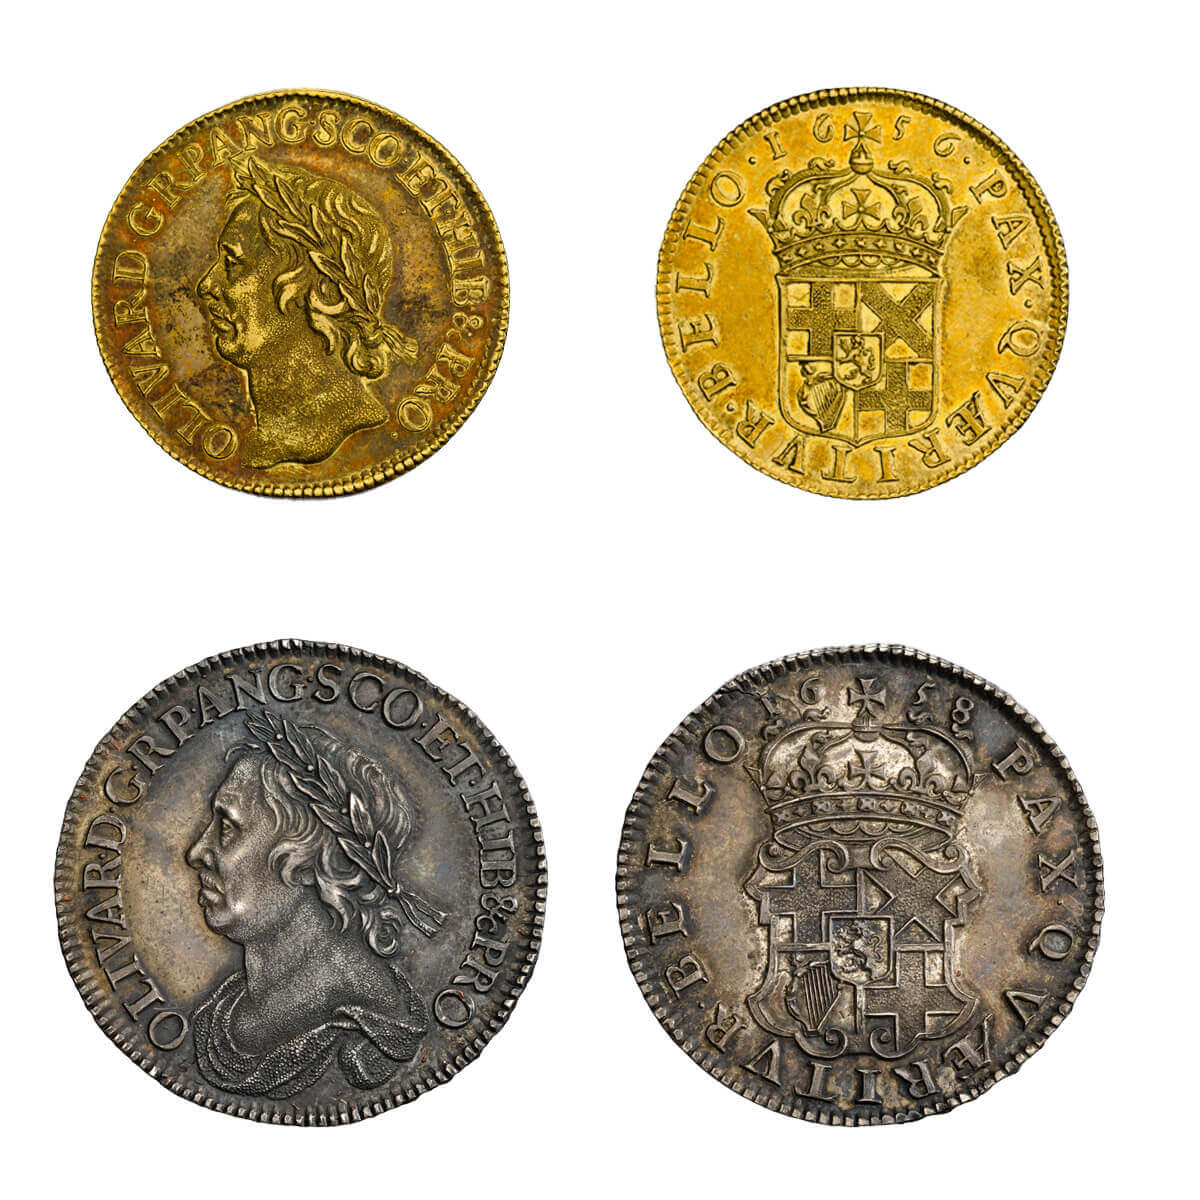 Cromwell trial coins.jpg